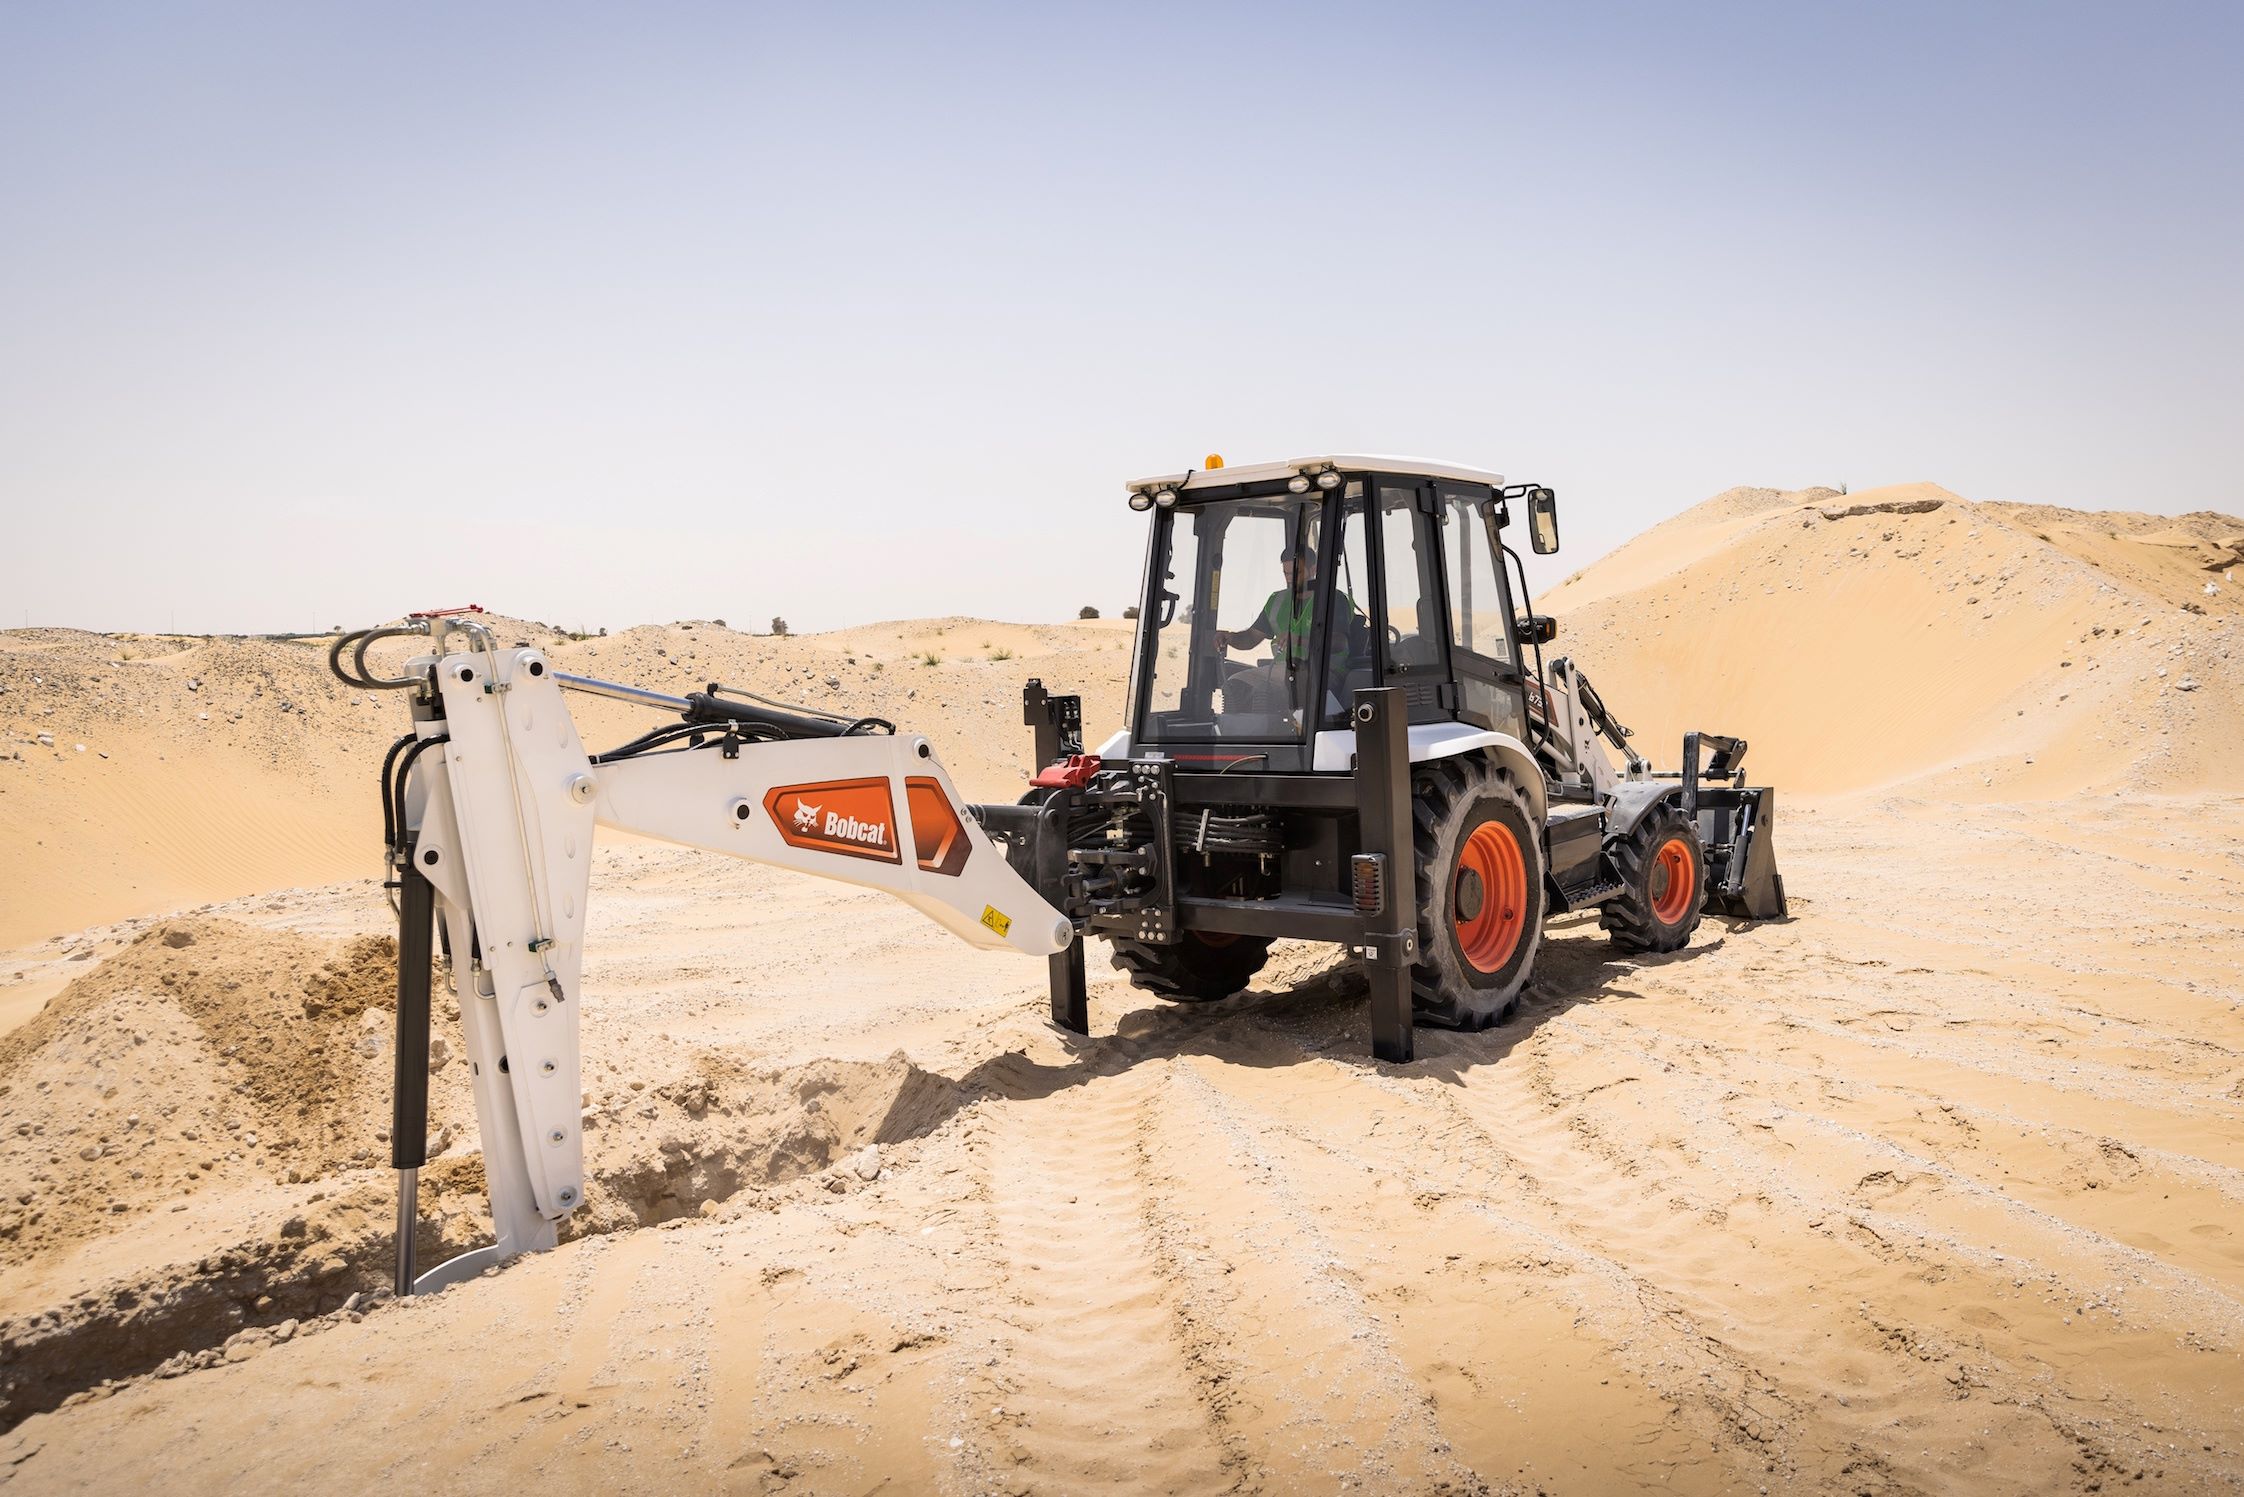 The new Bobcat backhoe loader range is available for the Middle East, Africa and CIS regions.